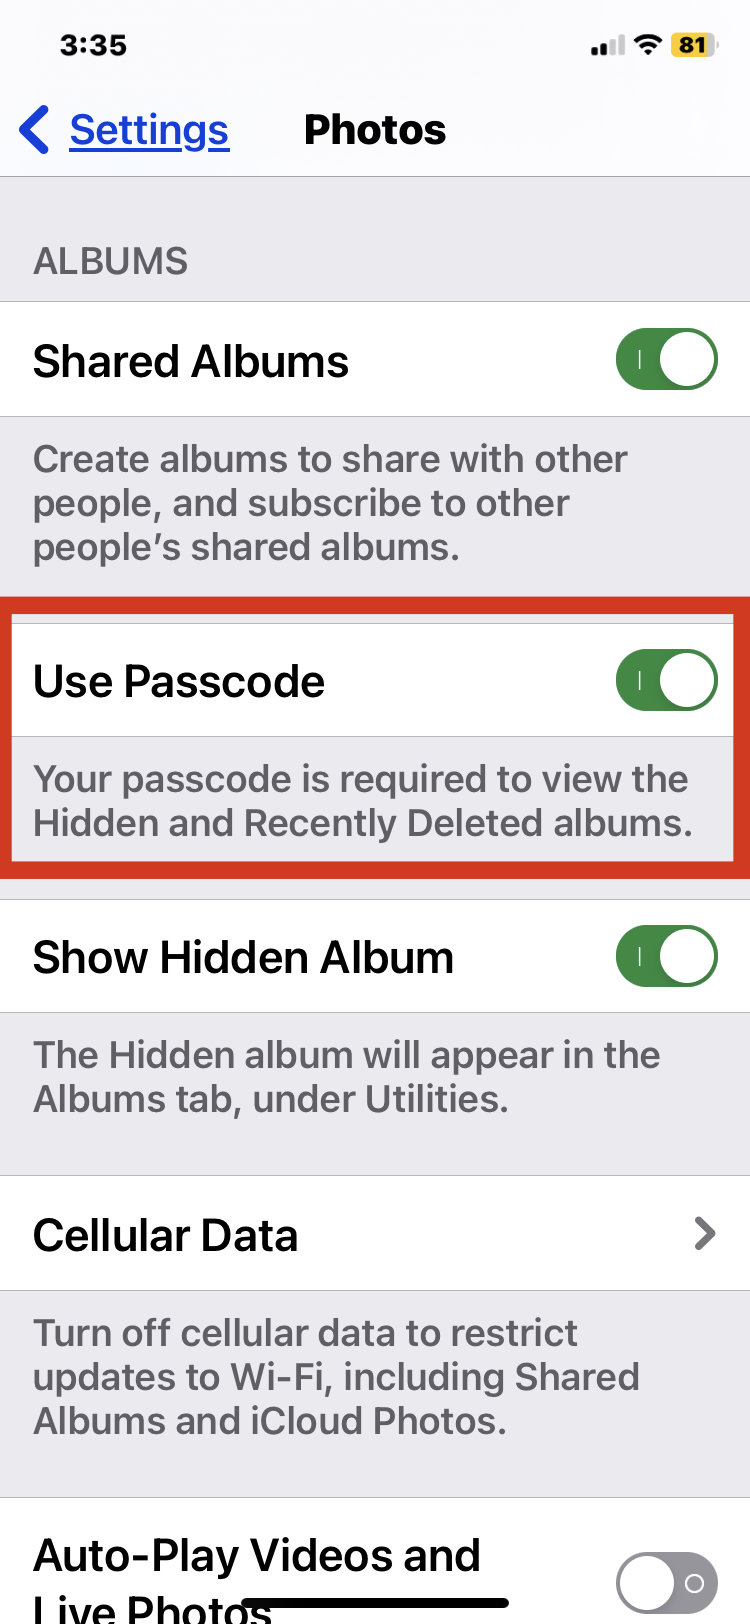 How to Protect Private Photos with Passcode, Face ID, or Touch ID on iPhone & iPad